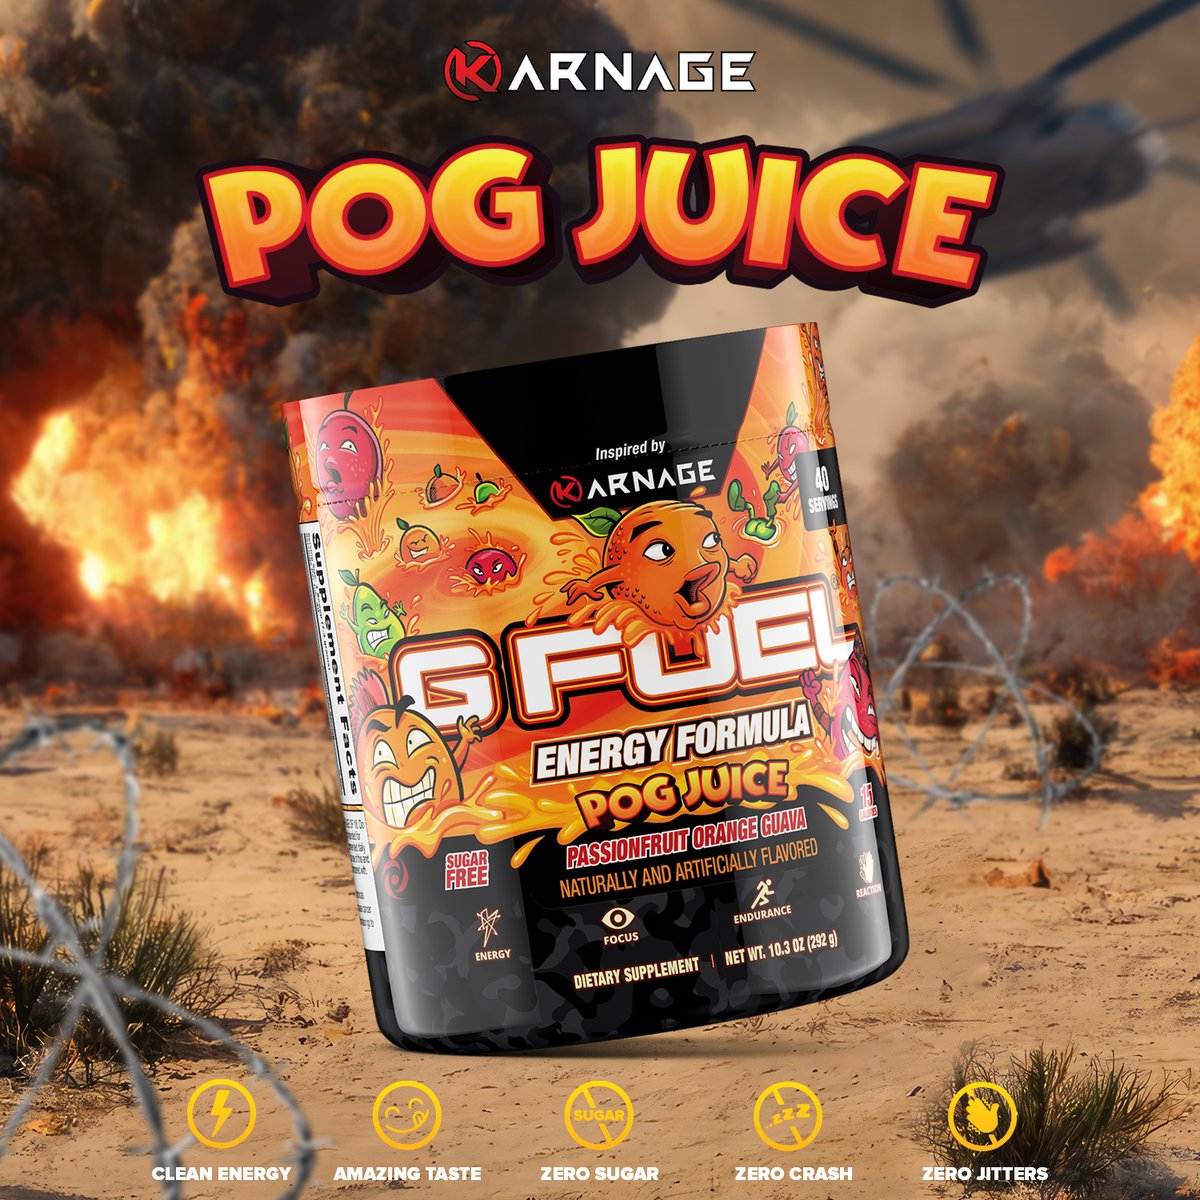 ❤️ 𝗥𝗧 + 𝗖𝗼𝗺𝗺𝗲𝗻𝘁 '𝗣𝗢𝗚' to win a TUB of @KARNAGEclan's BRAND-NEW #GFUEL '𝐏𝐎𝐆 𝐉𝐔𝐈𝐂𝐄'!!! 2 winners picked tomorrow to celebrate the EARLY-ACCESS launch! 🔥😲💥 🛒 𝐆𝐄𝐓 𝐘𝐎𝐔𝐑𝐒: gfuel.ly/pog-juice-x